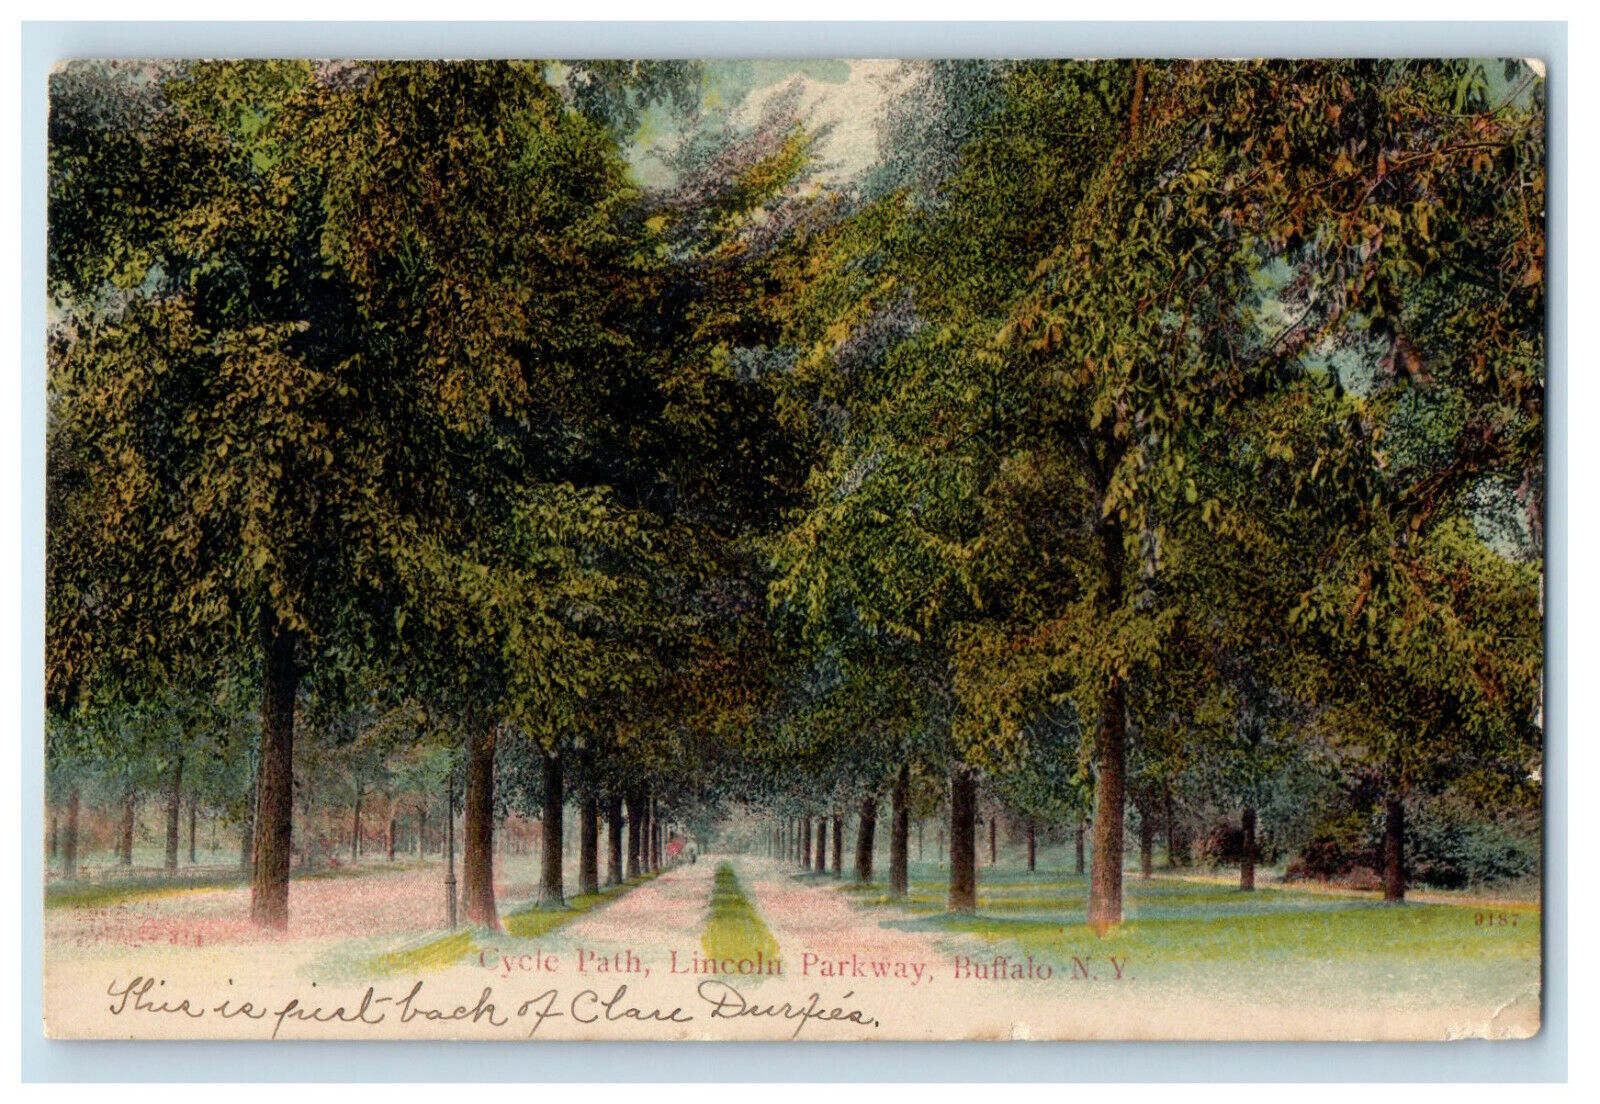 1907 Cycle Path Lincoln Parkway Buffalo New York NY Antique Posted Postcard